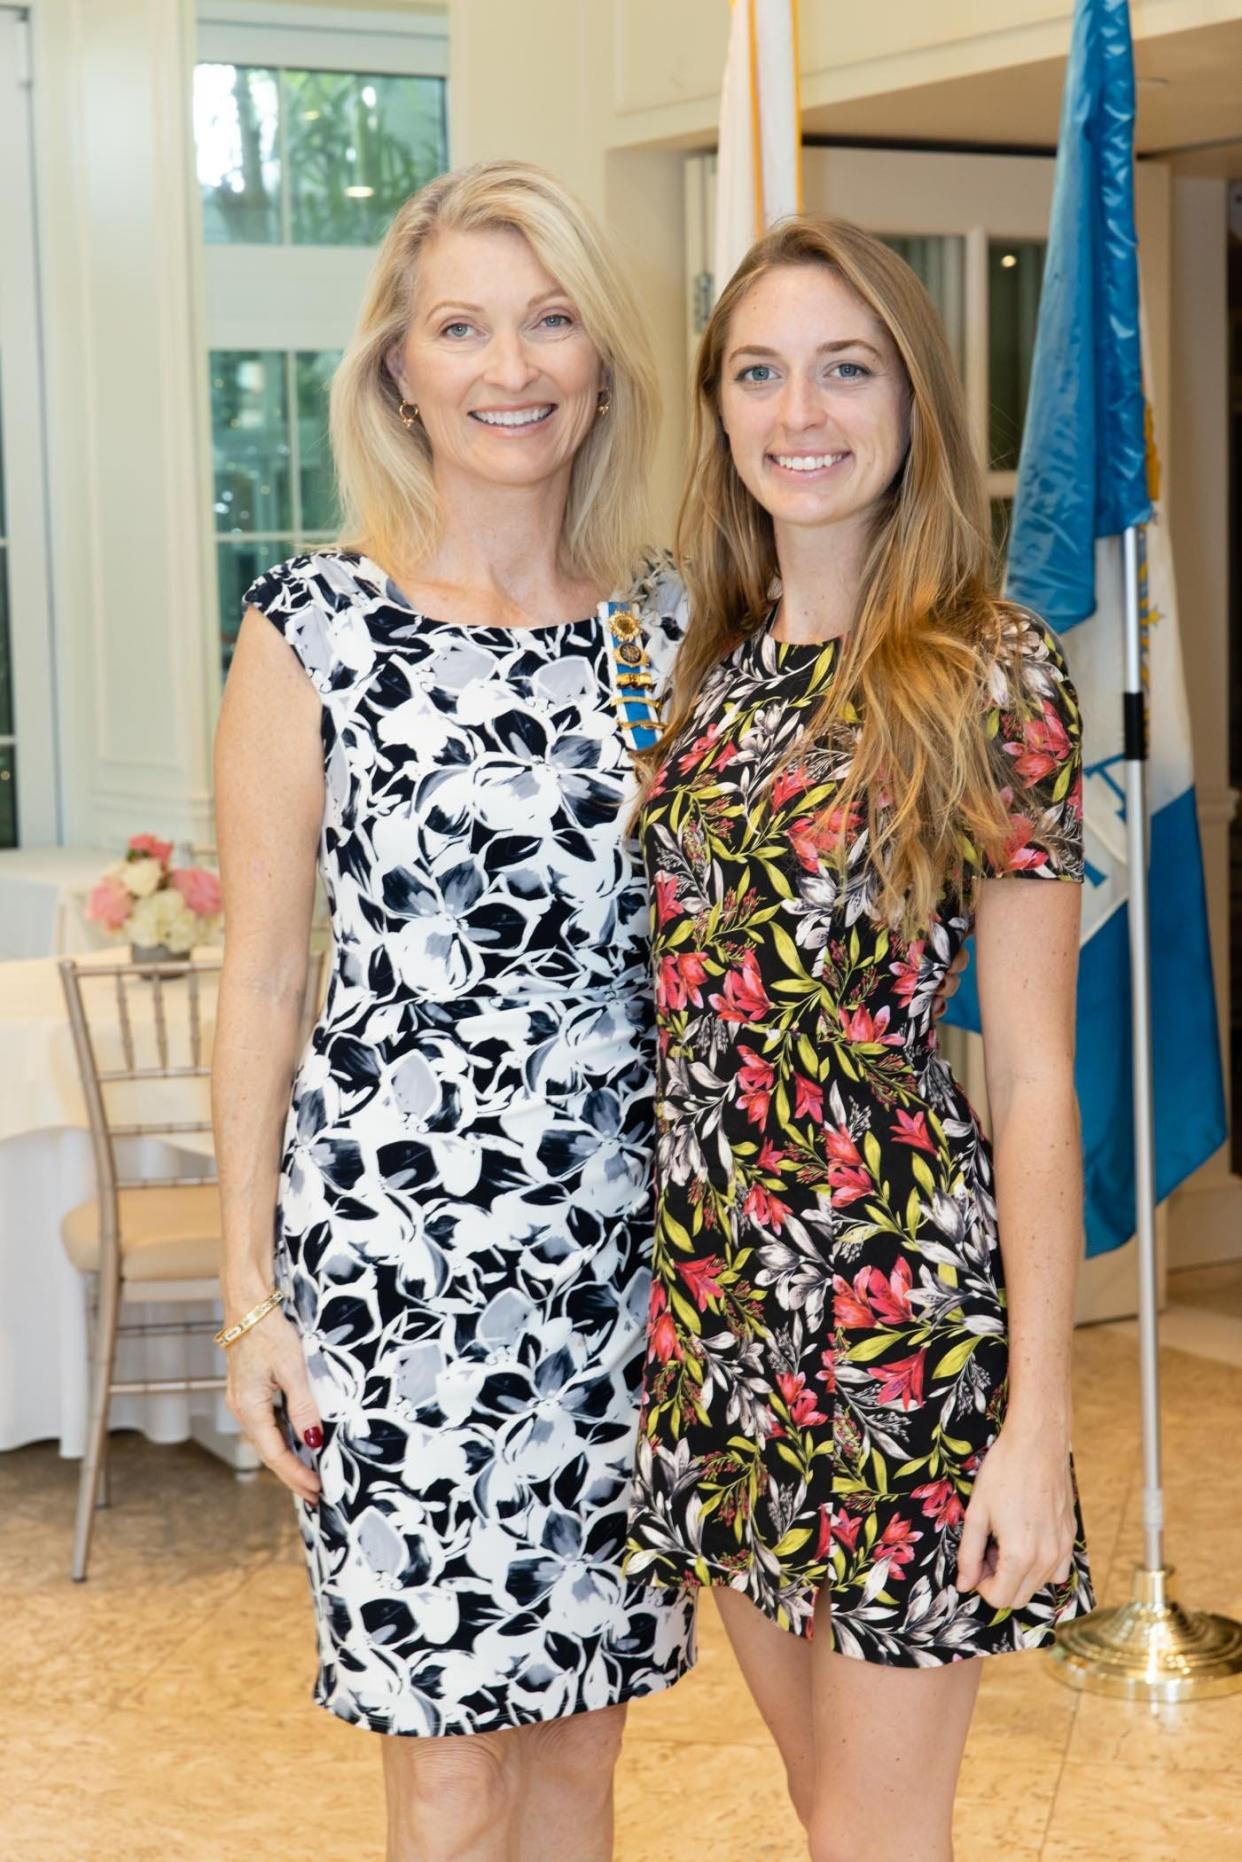 Sabra Ingeman and Hailey Ingeman at the Daughters of the American Revolution Palm Beach Chapter meeting and luncheon on February 16 at Club Colette. The DAR's New Members Luncheon is set for Oct. 26 at Café Boulud.